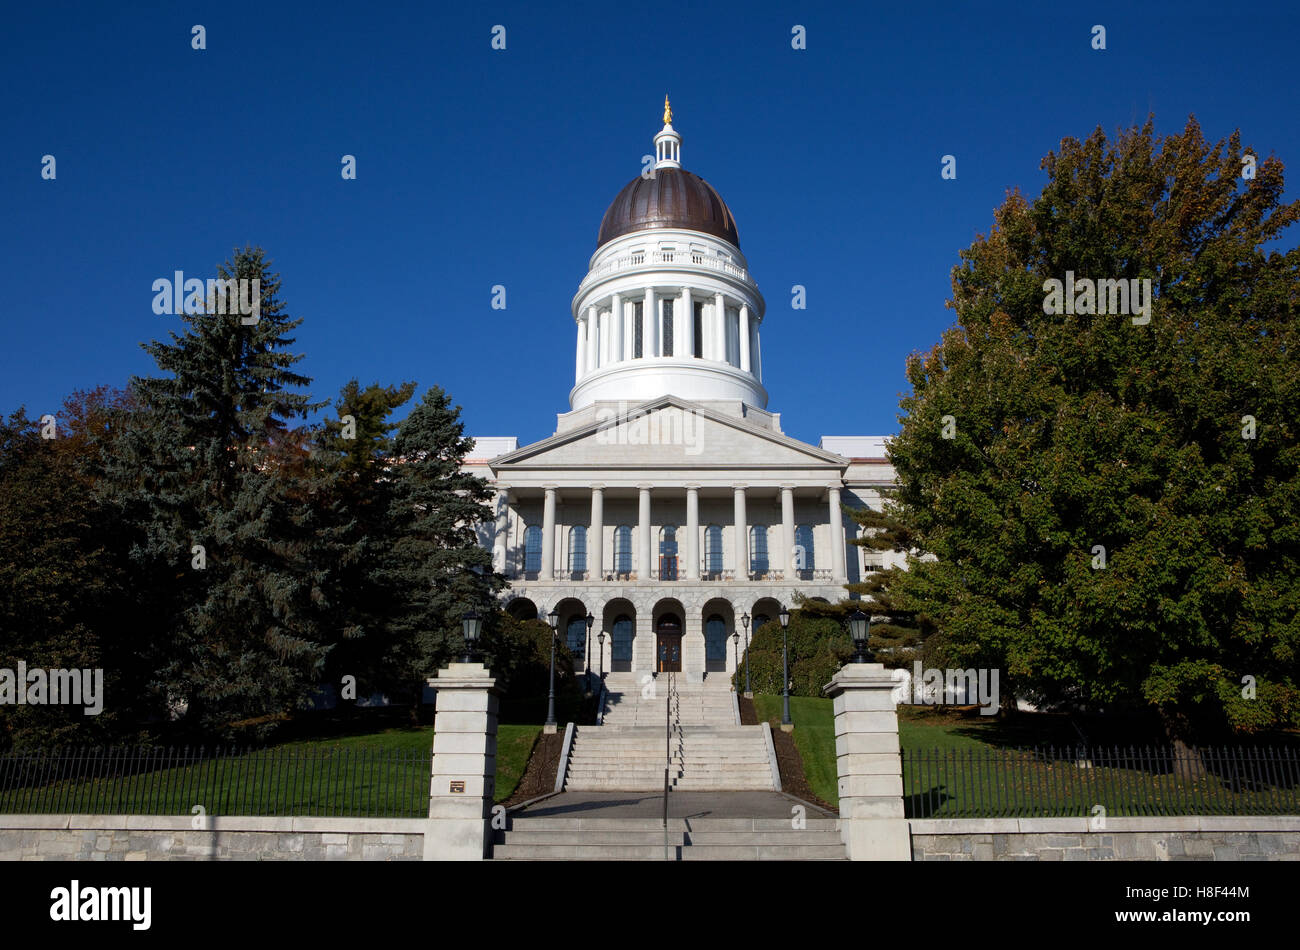 Maine Statehouse capitol building is located in Augusta, ME, USA. Stock Photo